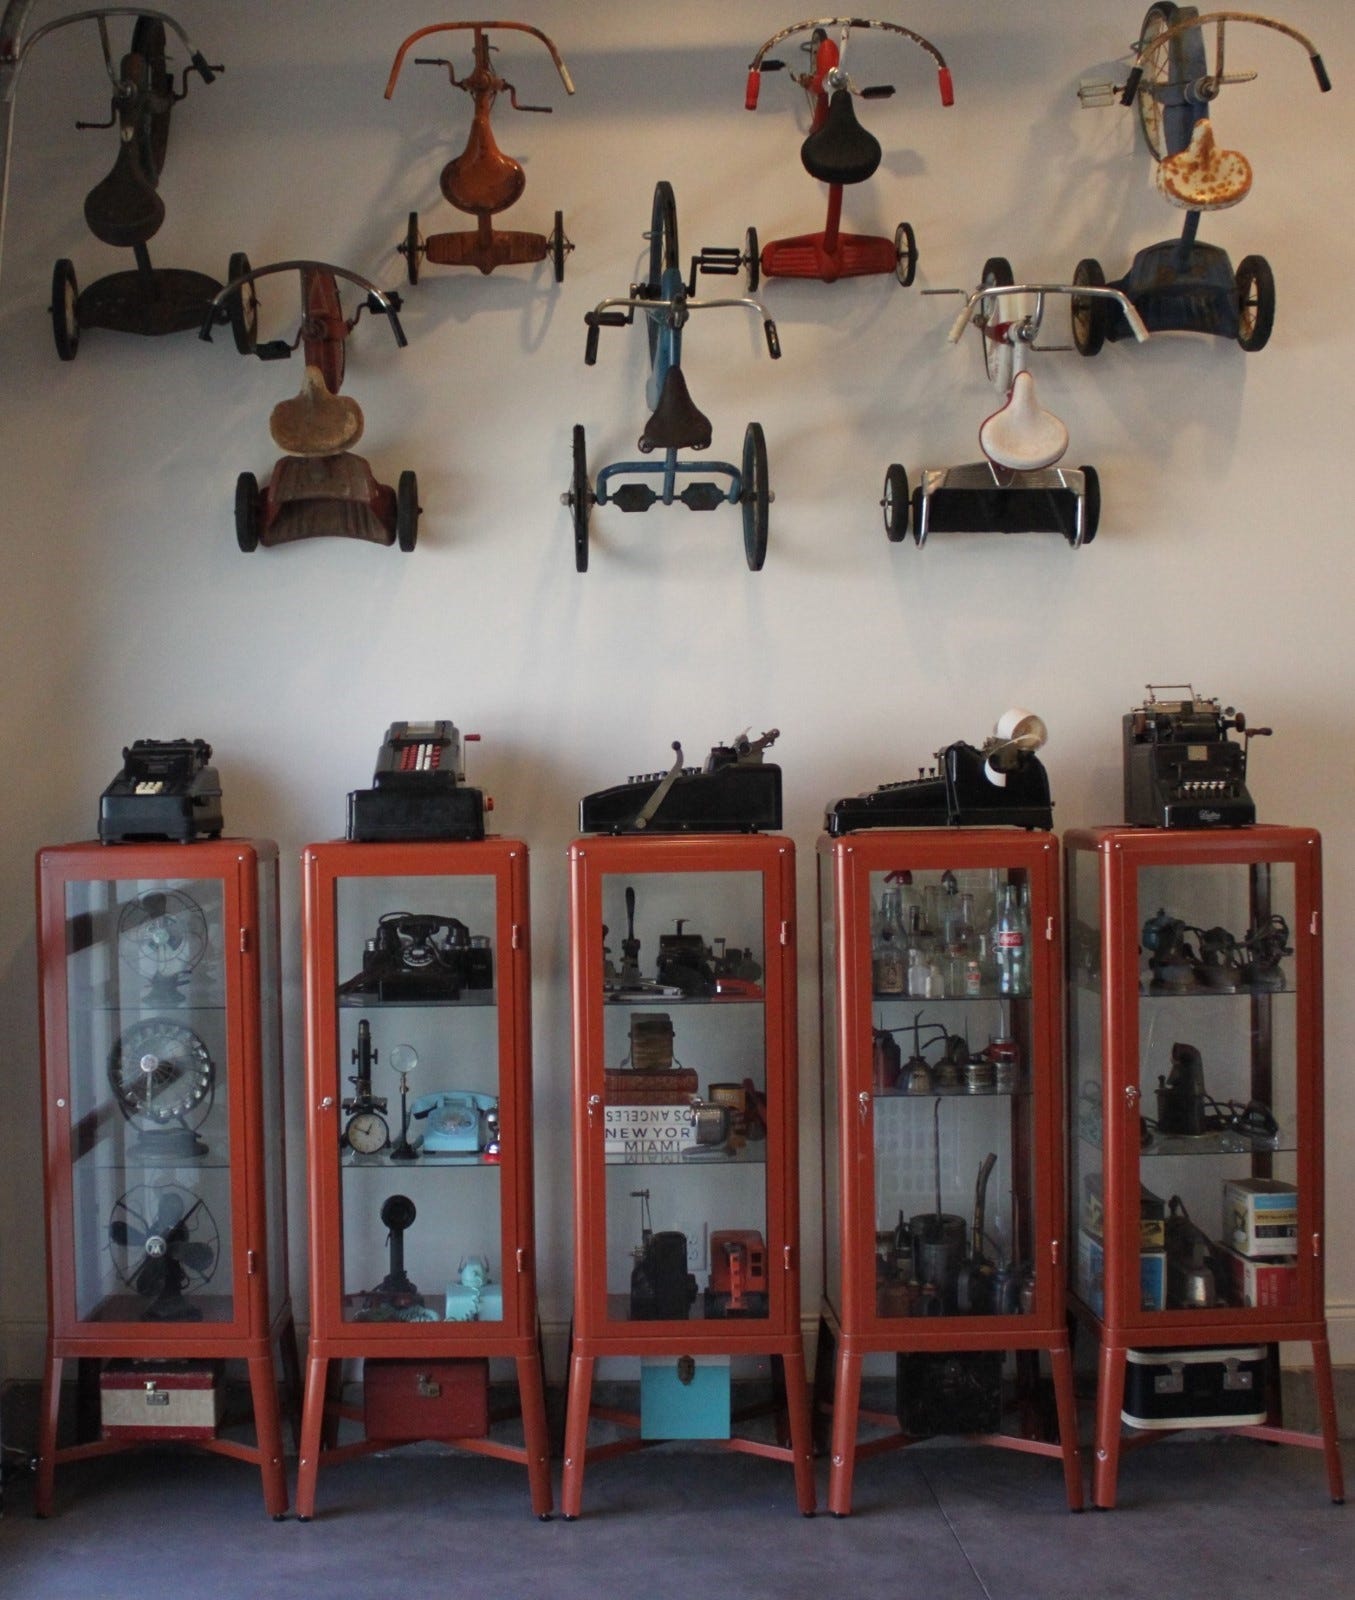 A row of red metal shelves with various objects on the wall

Description automatically generated